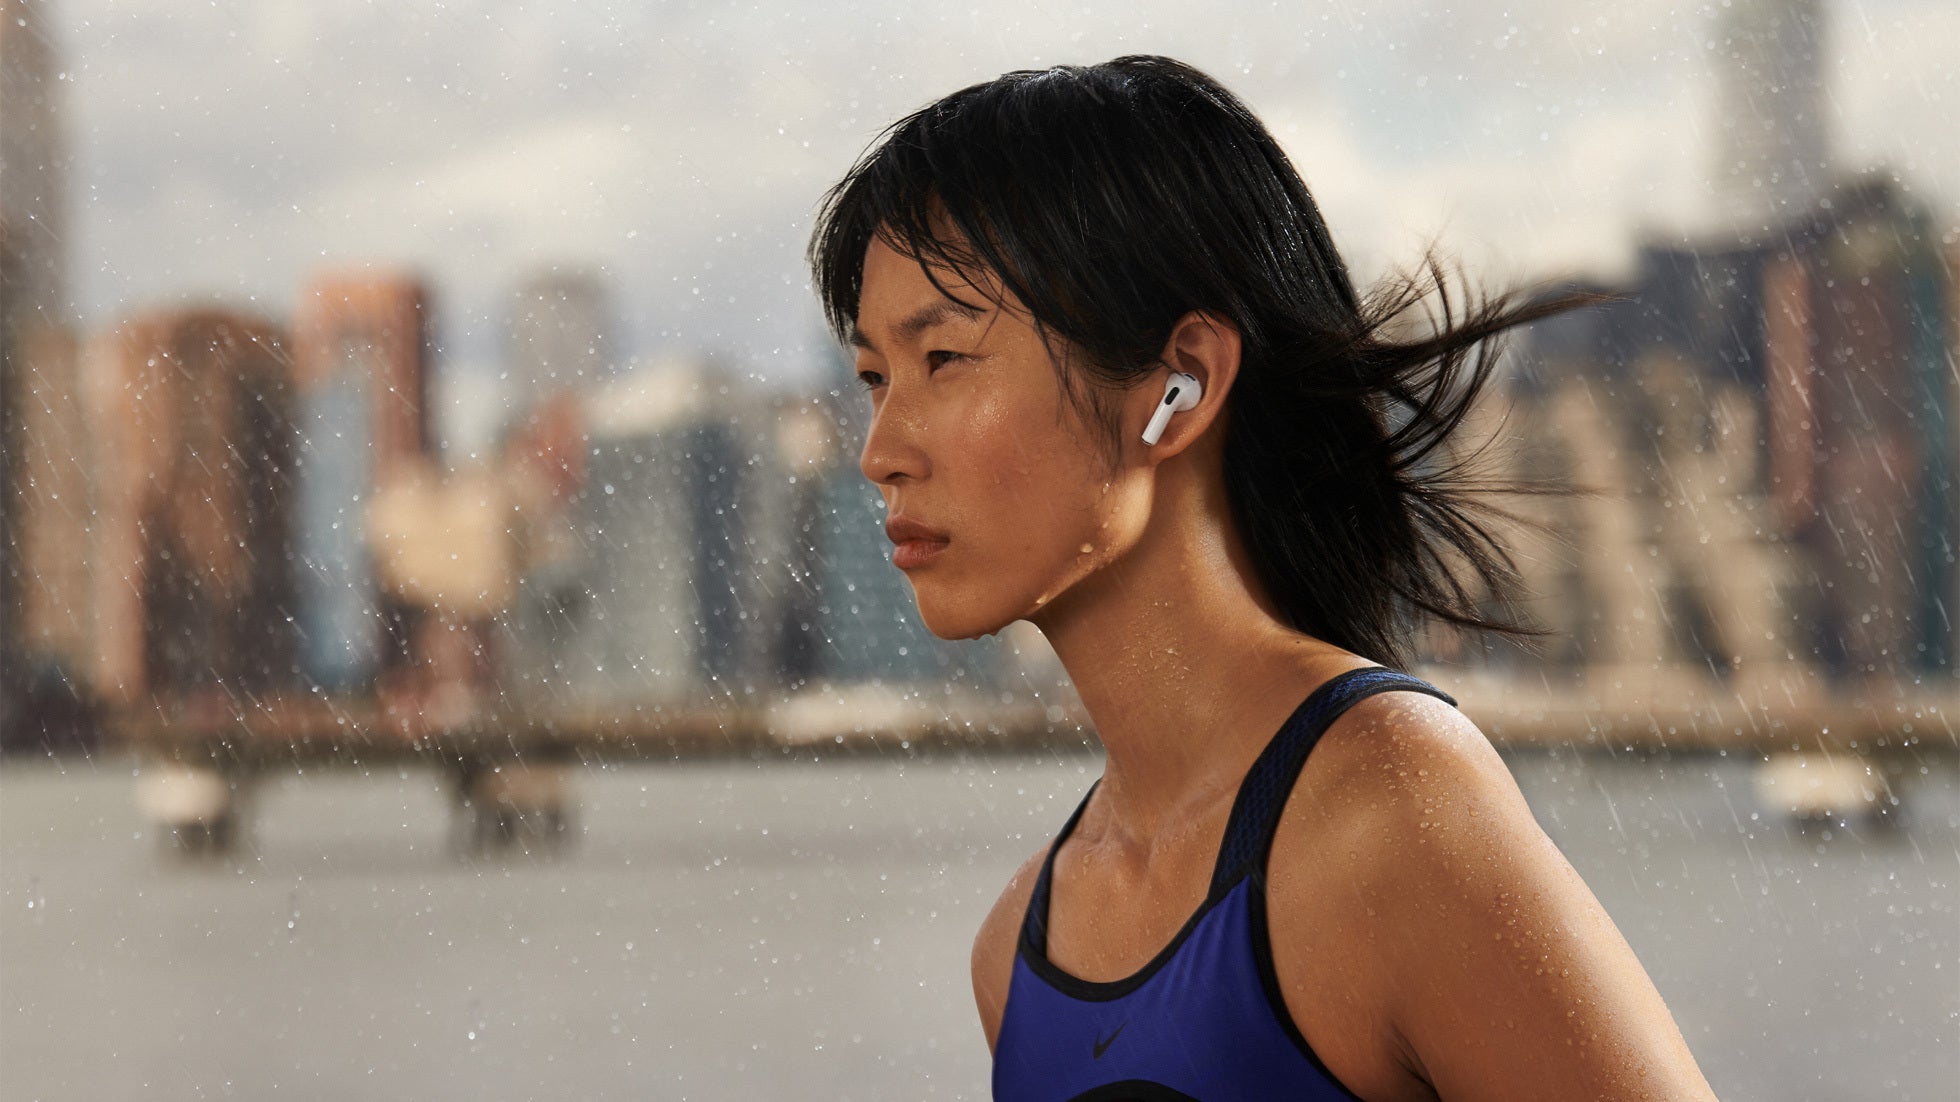 The AirPods 3 are sweat and water resistant - AirPods 3 are official: head-tracking Spatial Audio, lower starting price